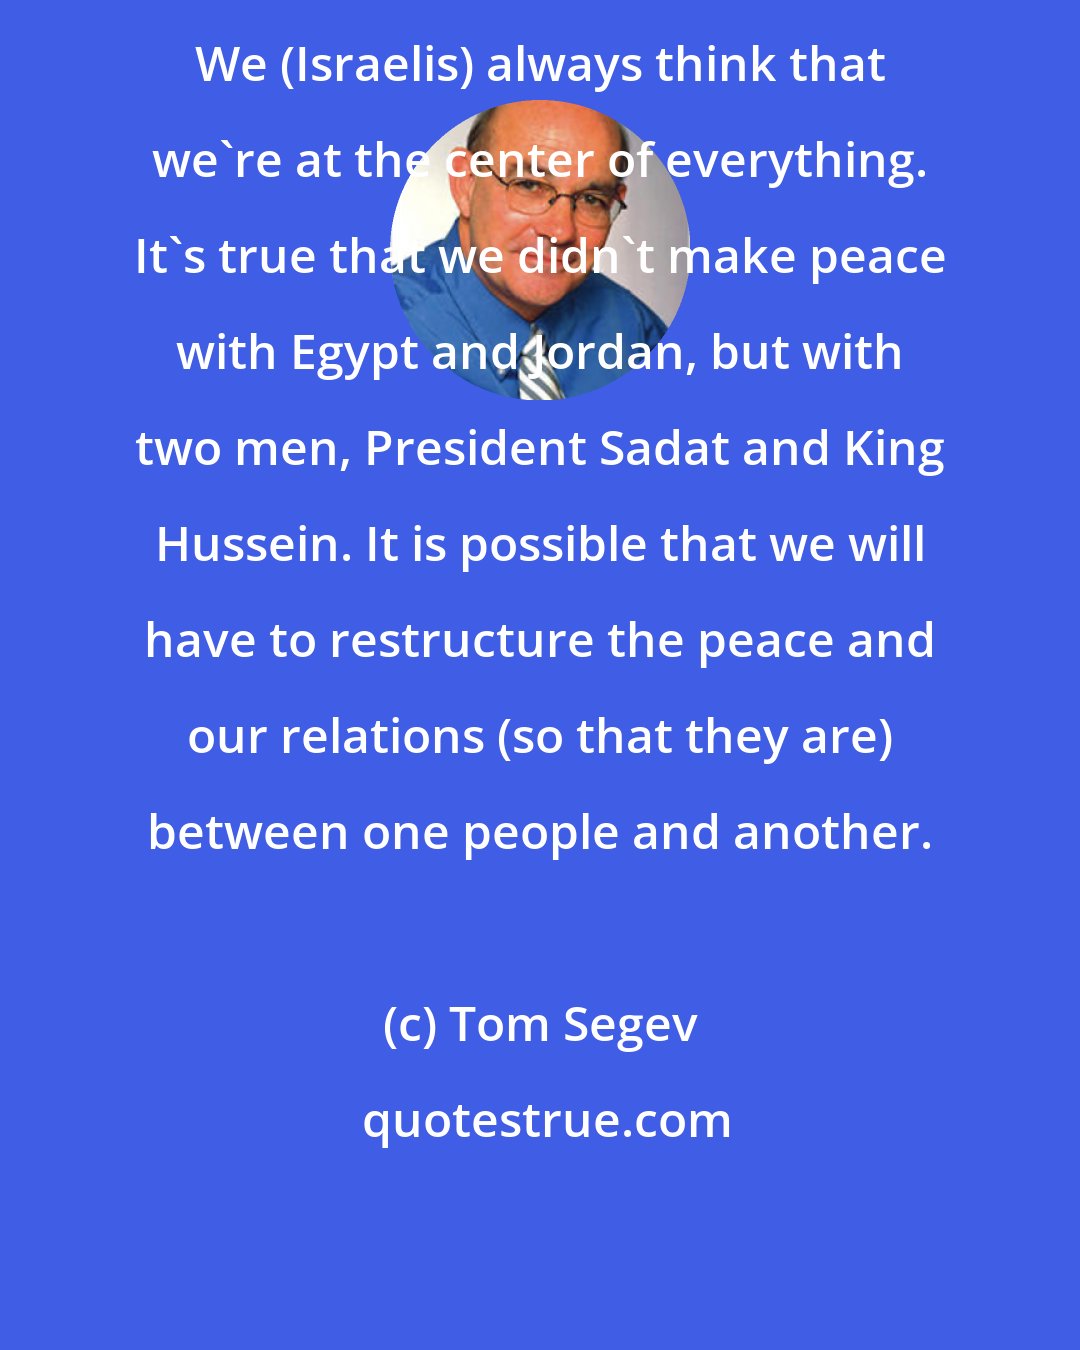 Tom Segev: We (Israelis) always think that we're at the center of everything. It's true that we didn't make peace with Egypt and Jordan, but with two men, President Sadat and King Hussein. It is possible that we will have to restructure the peace and our relations (so that they are) between one people and another.